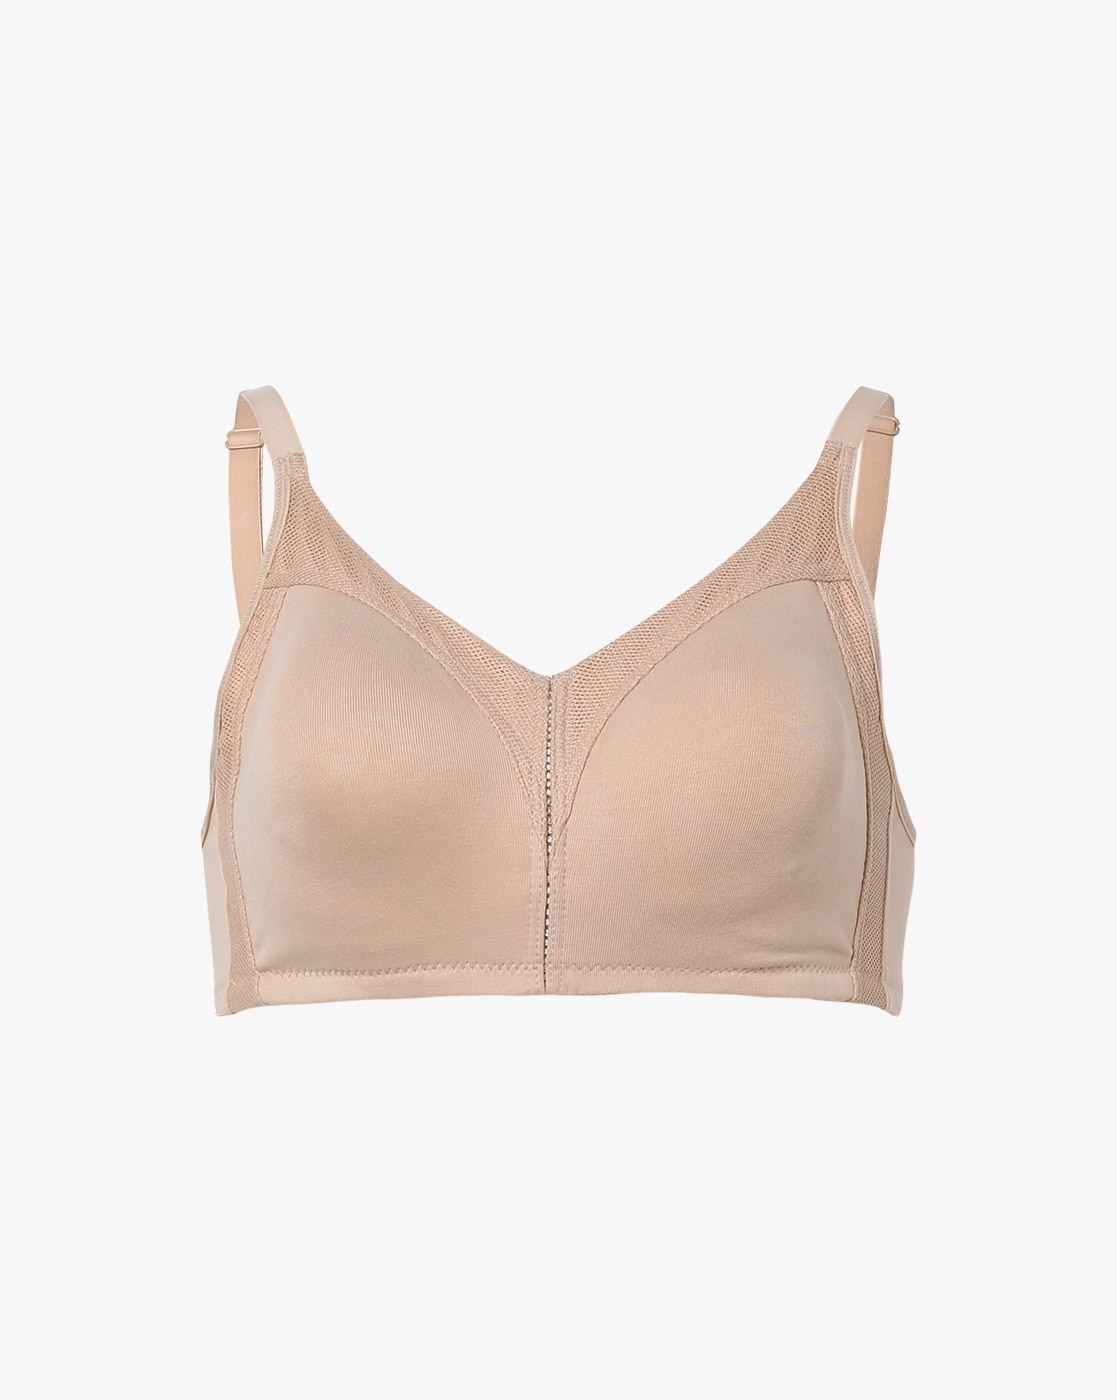 Buy ENAMOR Non-Wired Fixed Strap Non Padded Women's Every Day Bra